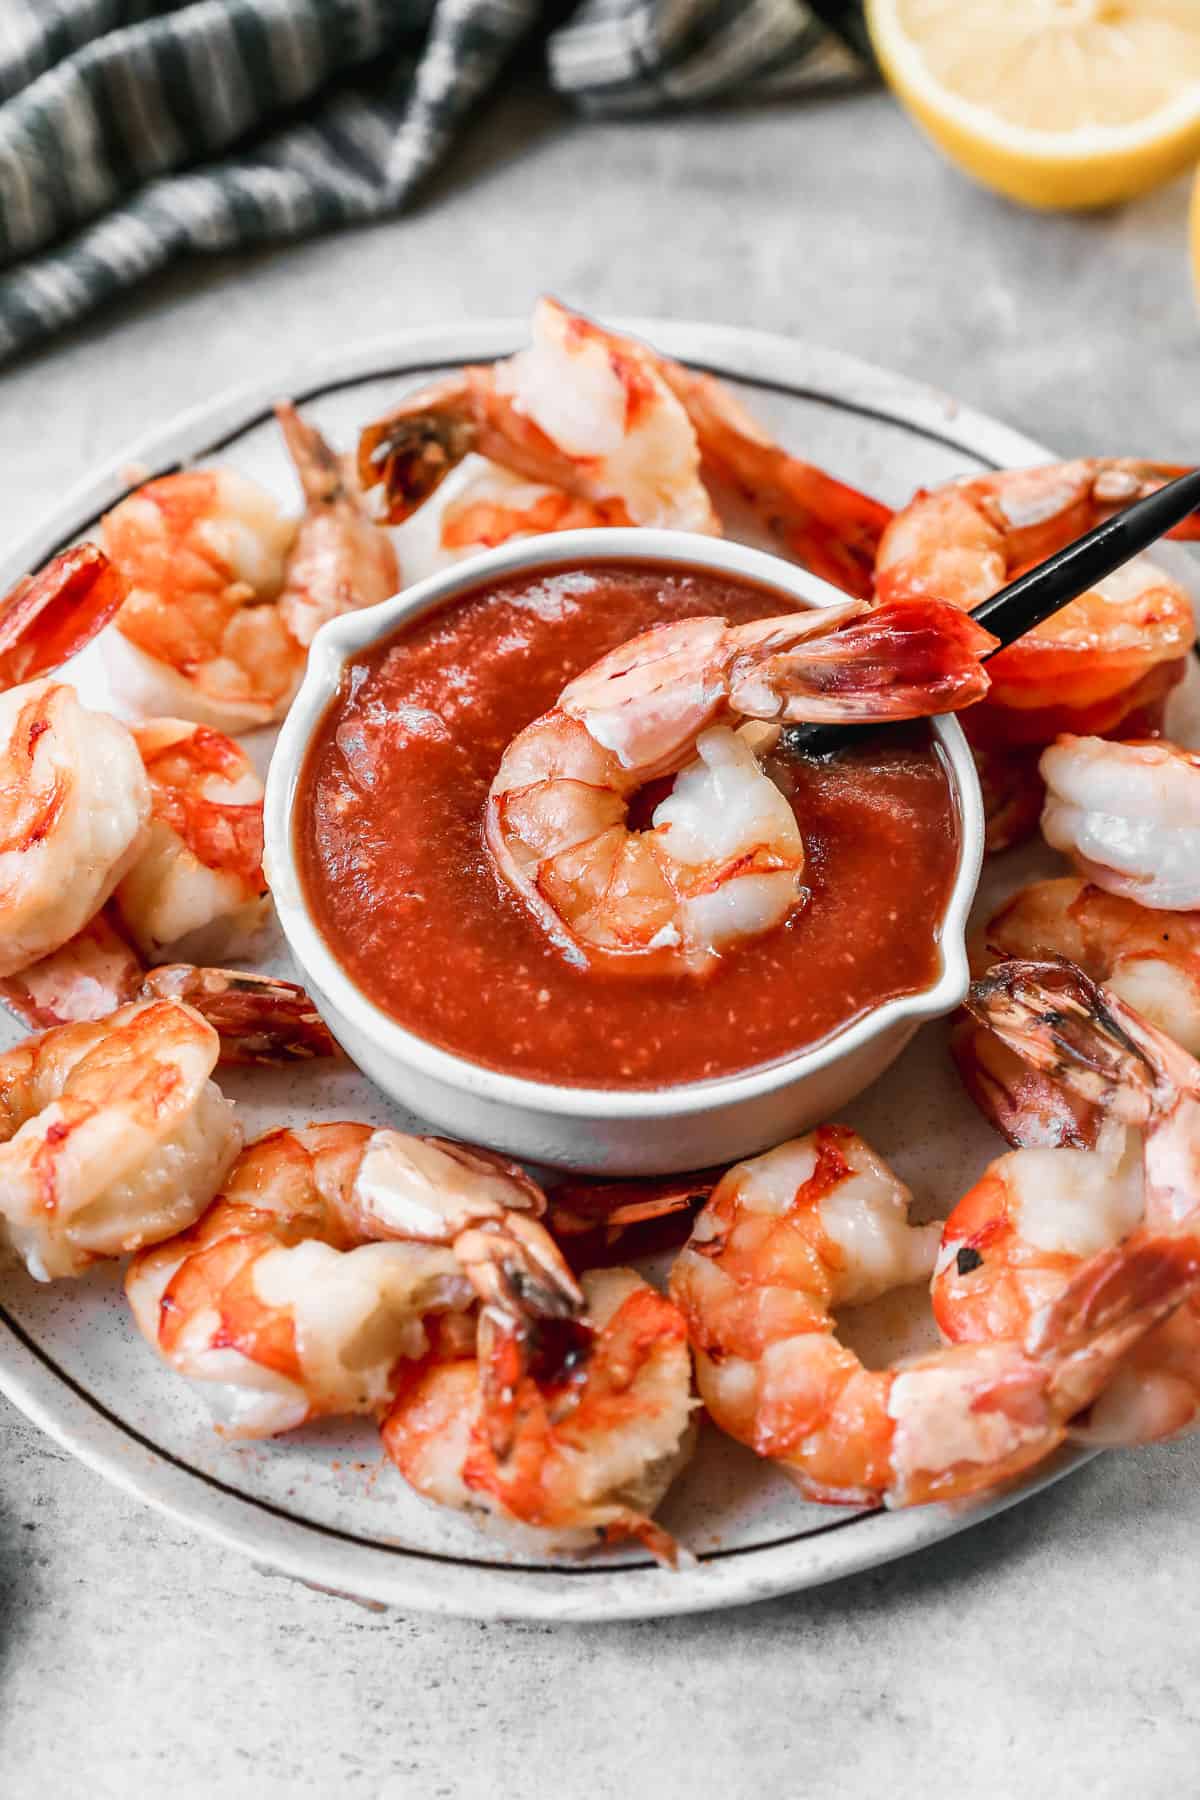 A platter of shrimp and a bowl in the middle for an easy Shrimp Cocktail sauce and one shrimp on top of the sauce.